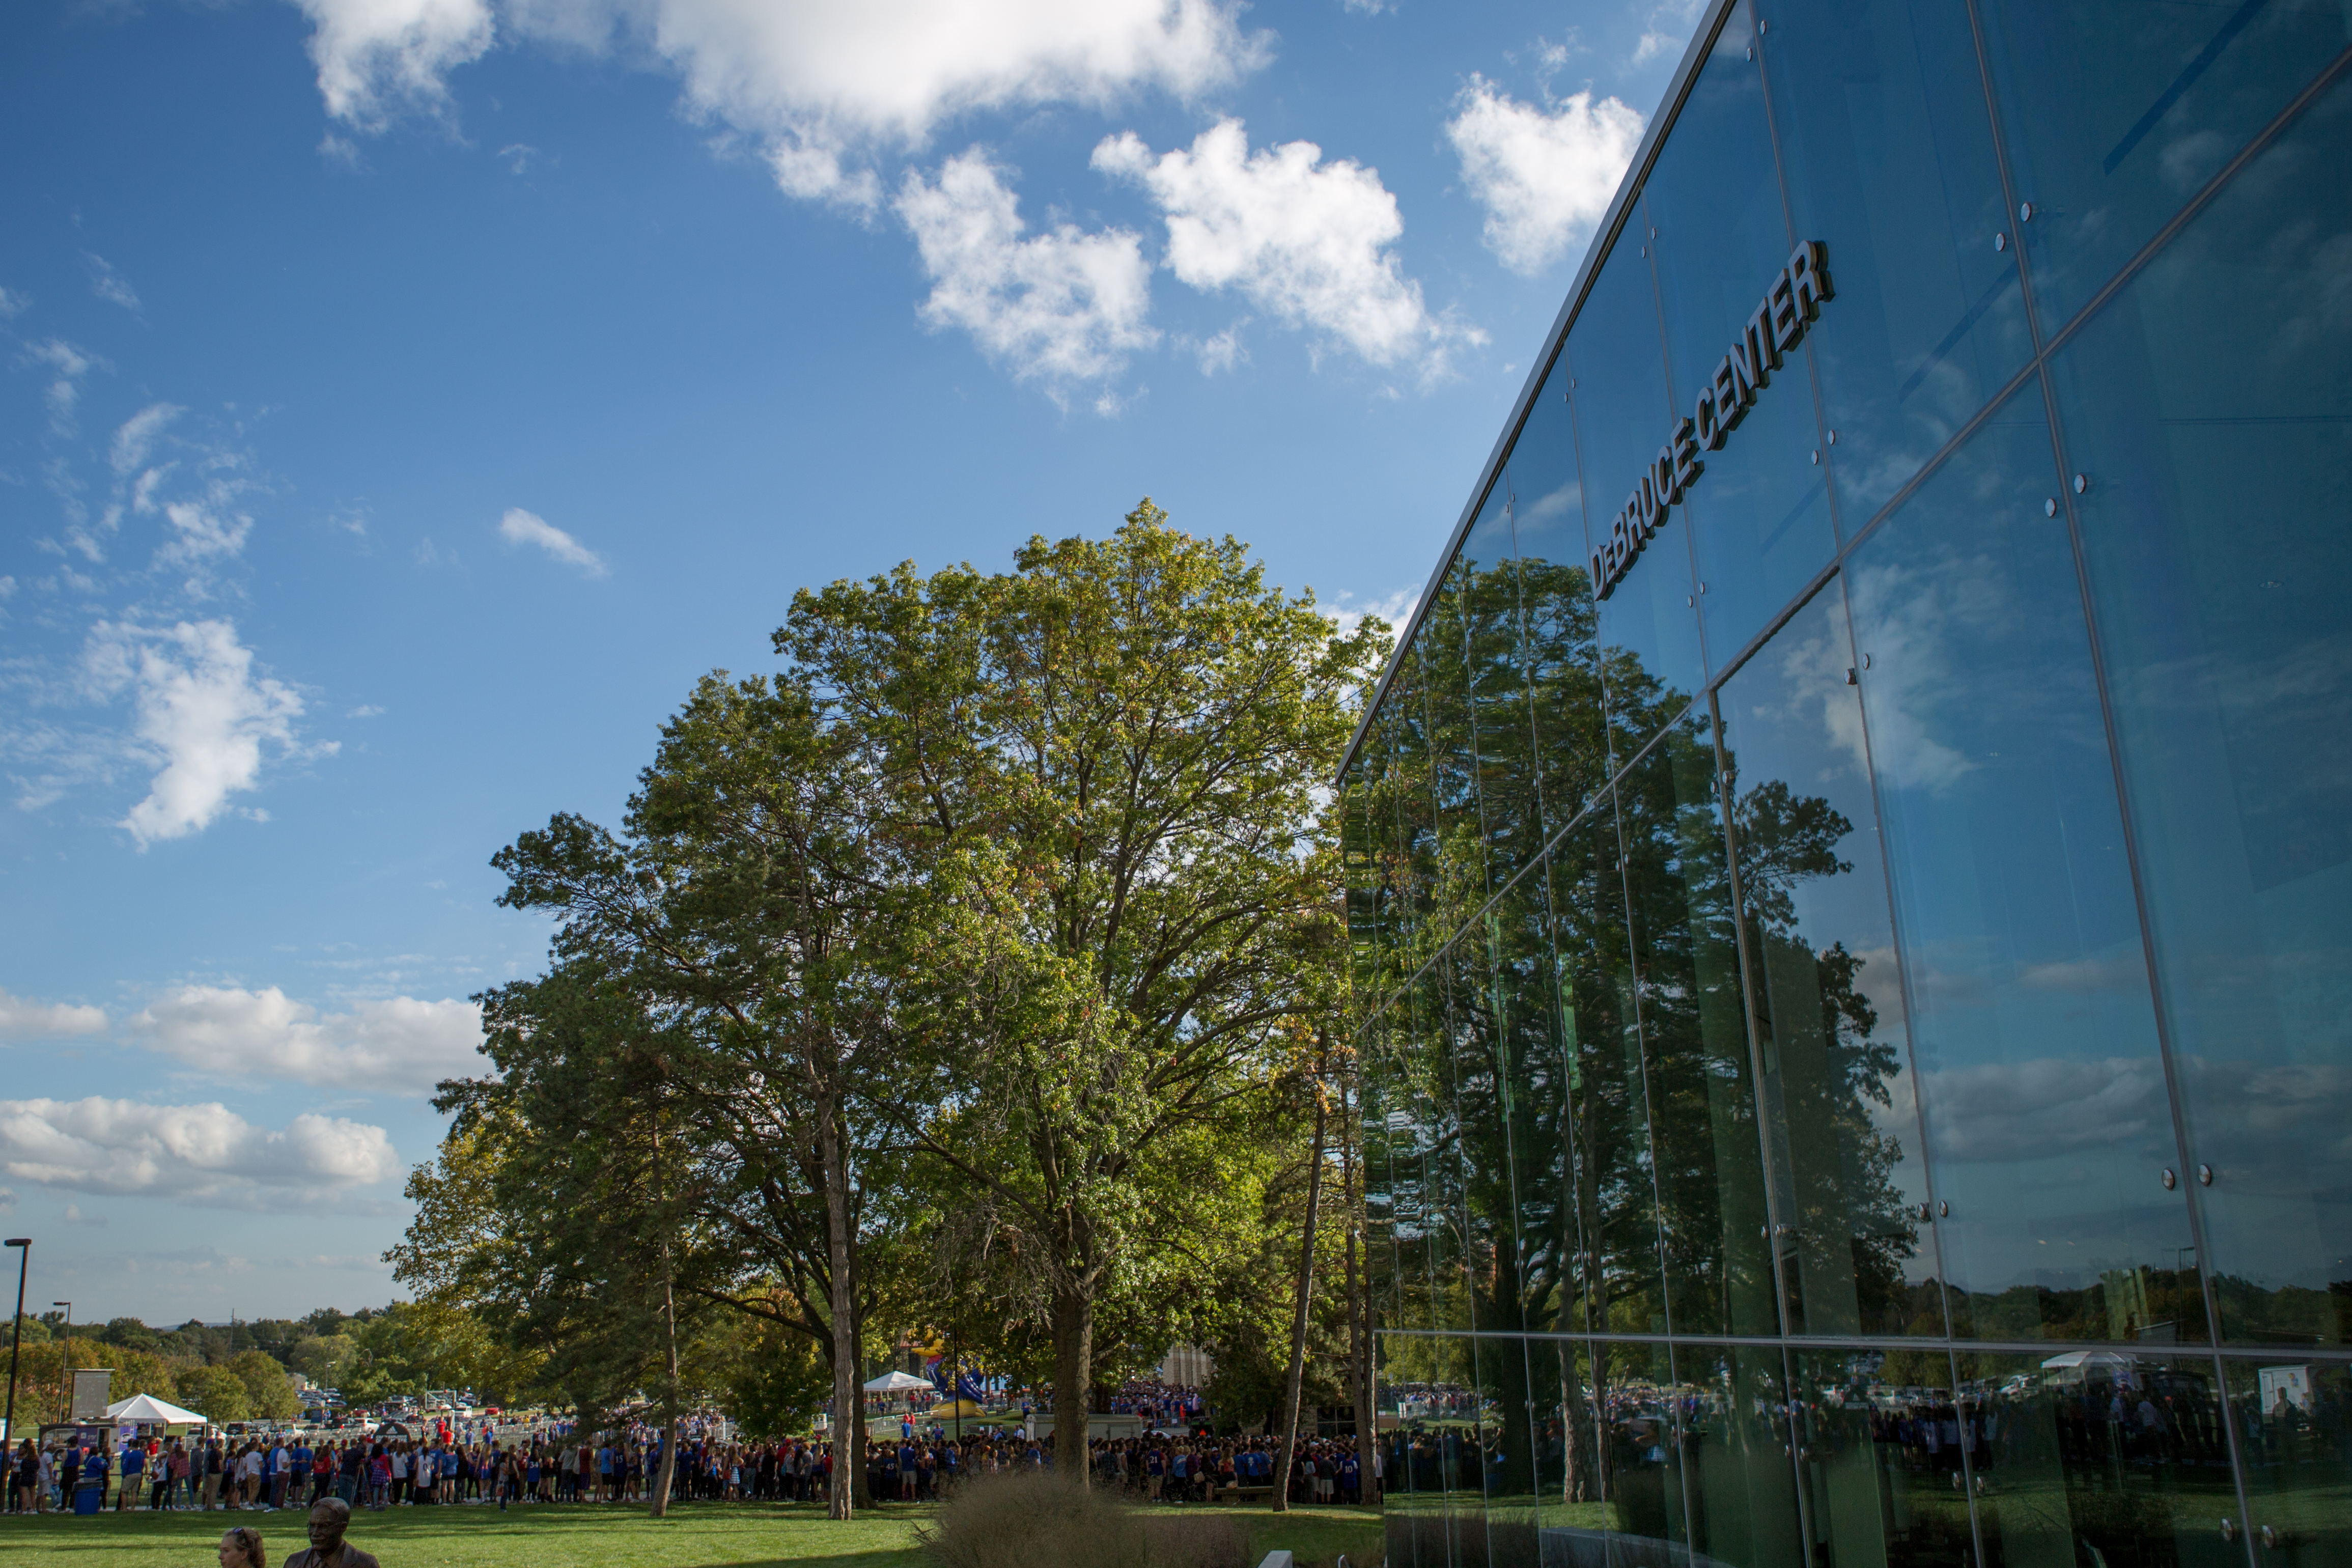 a tree, clouds, and a blue sky are reflected in the windows of the DeBruce Center